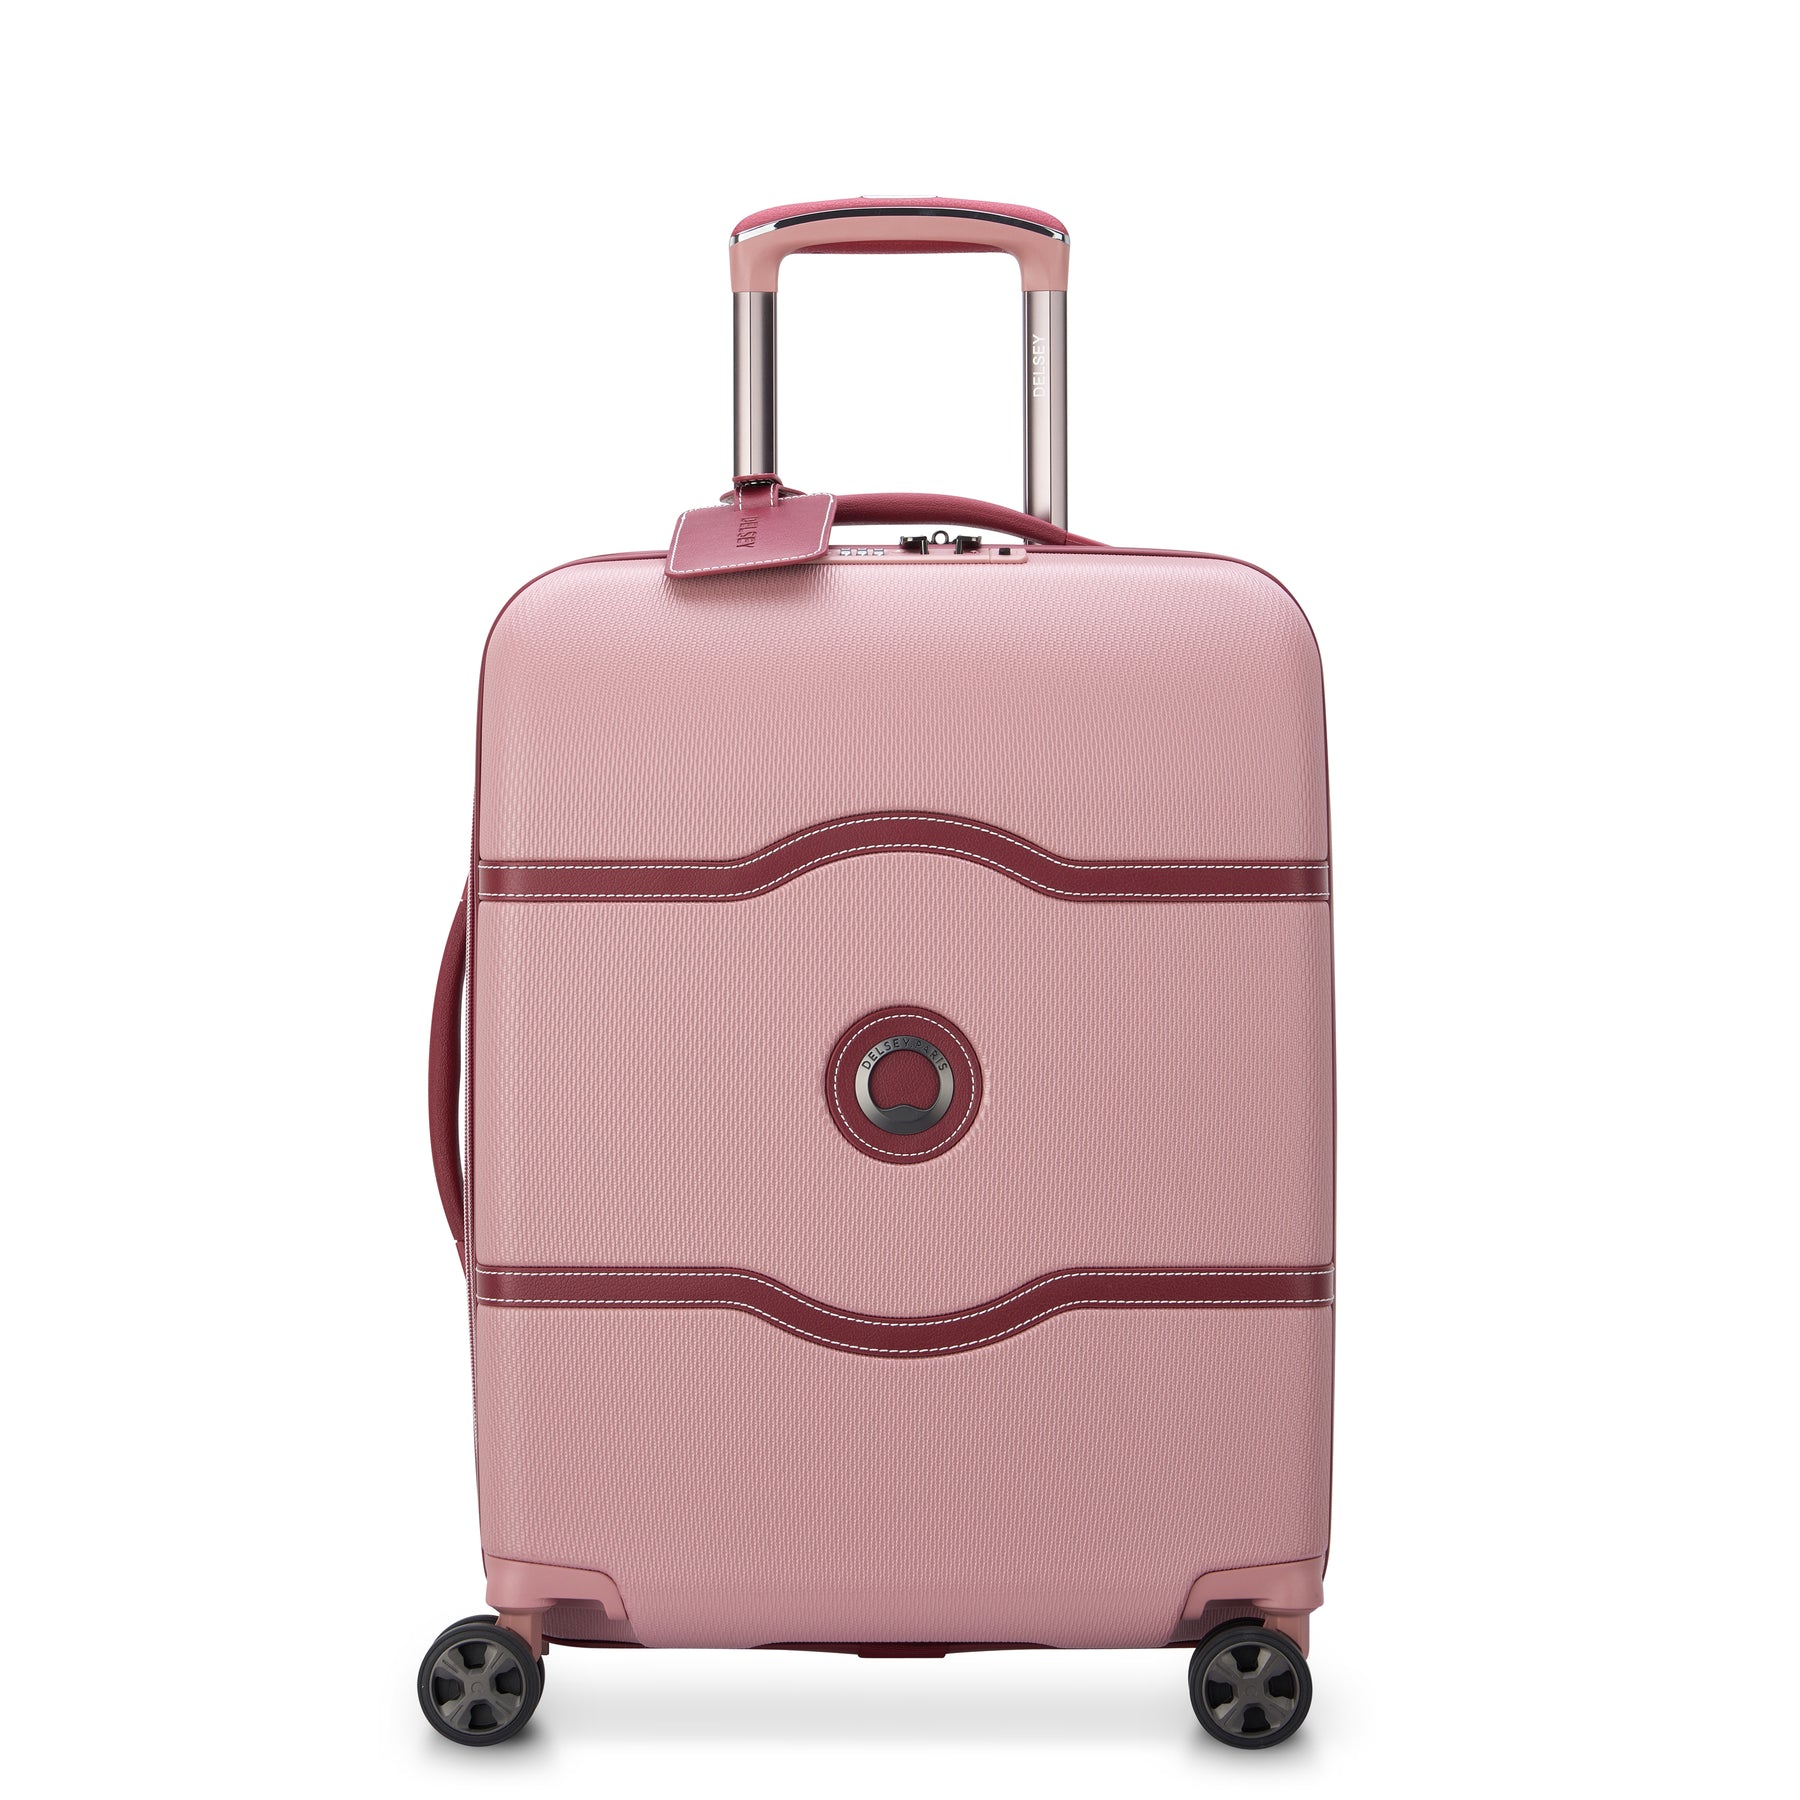 CHATELET AIR 2.0 - Valise soute